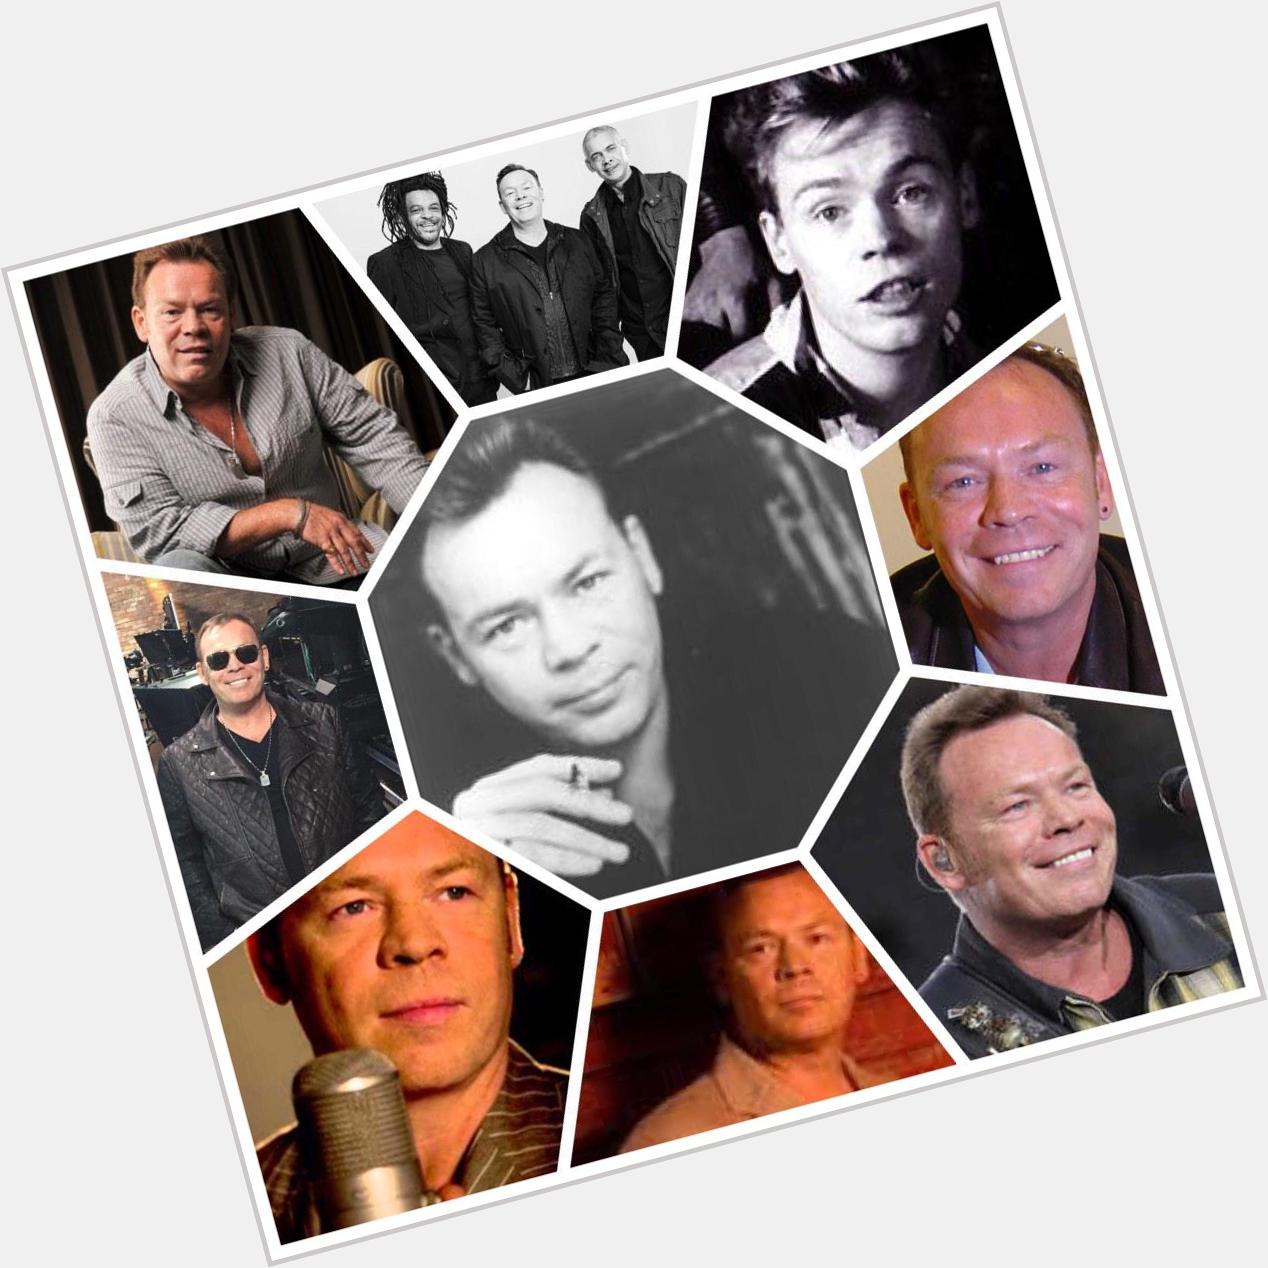 Happy birthday to Ali Campbell the reggae legend.keep the songs coming grew up on your amazing voice. True legend 